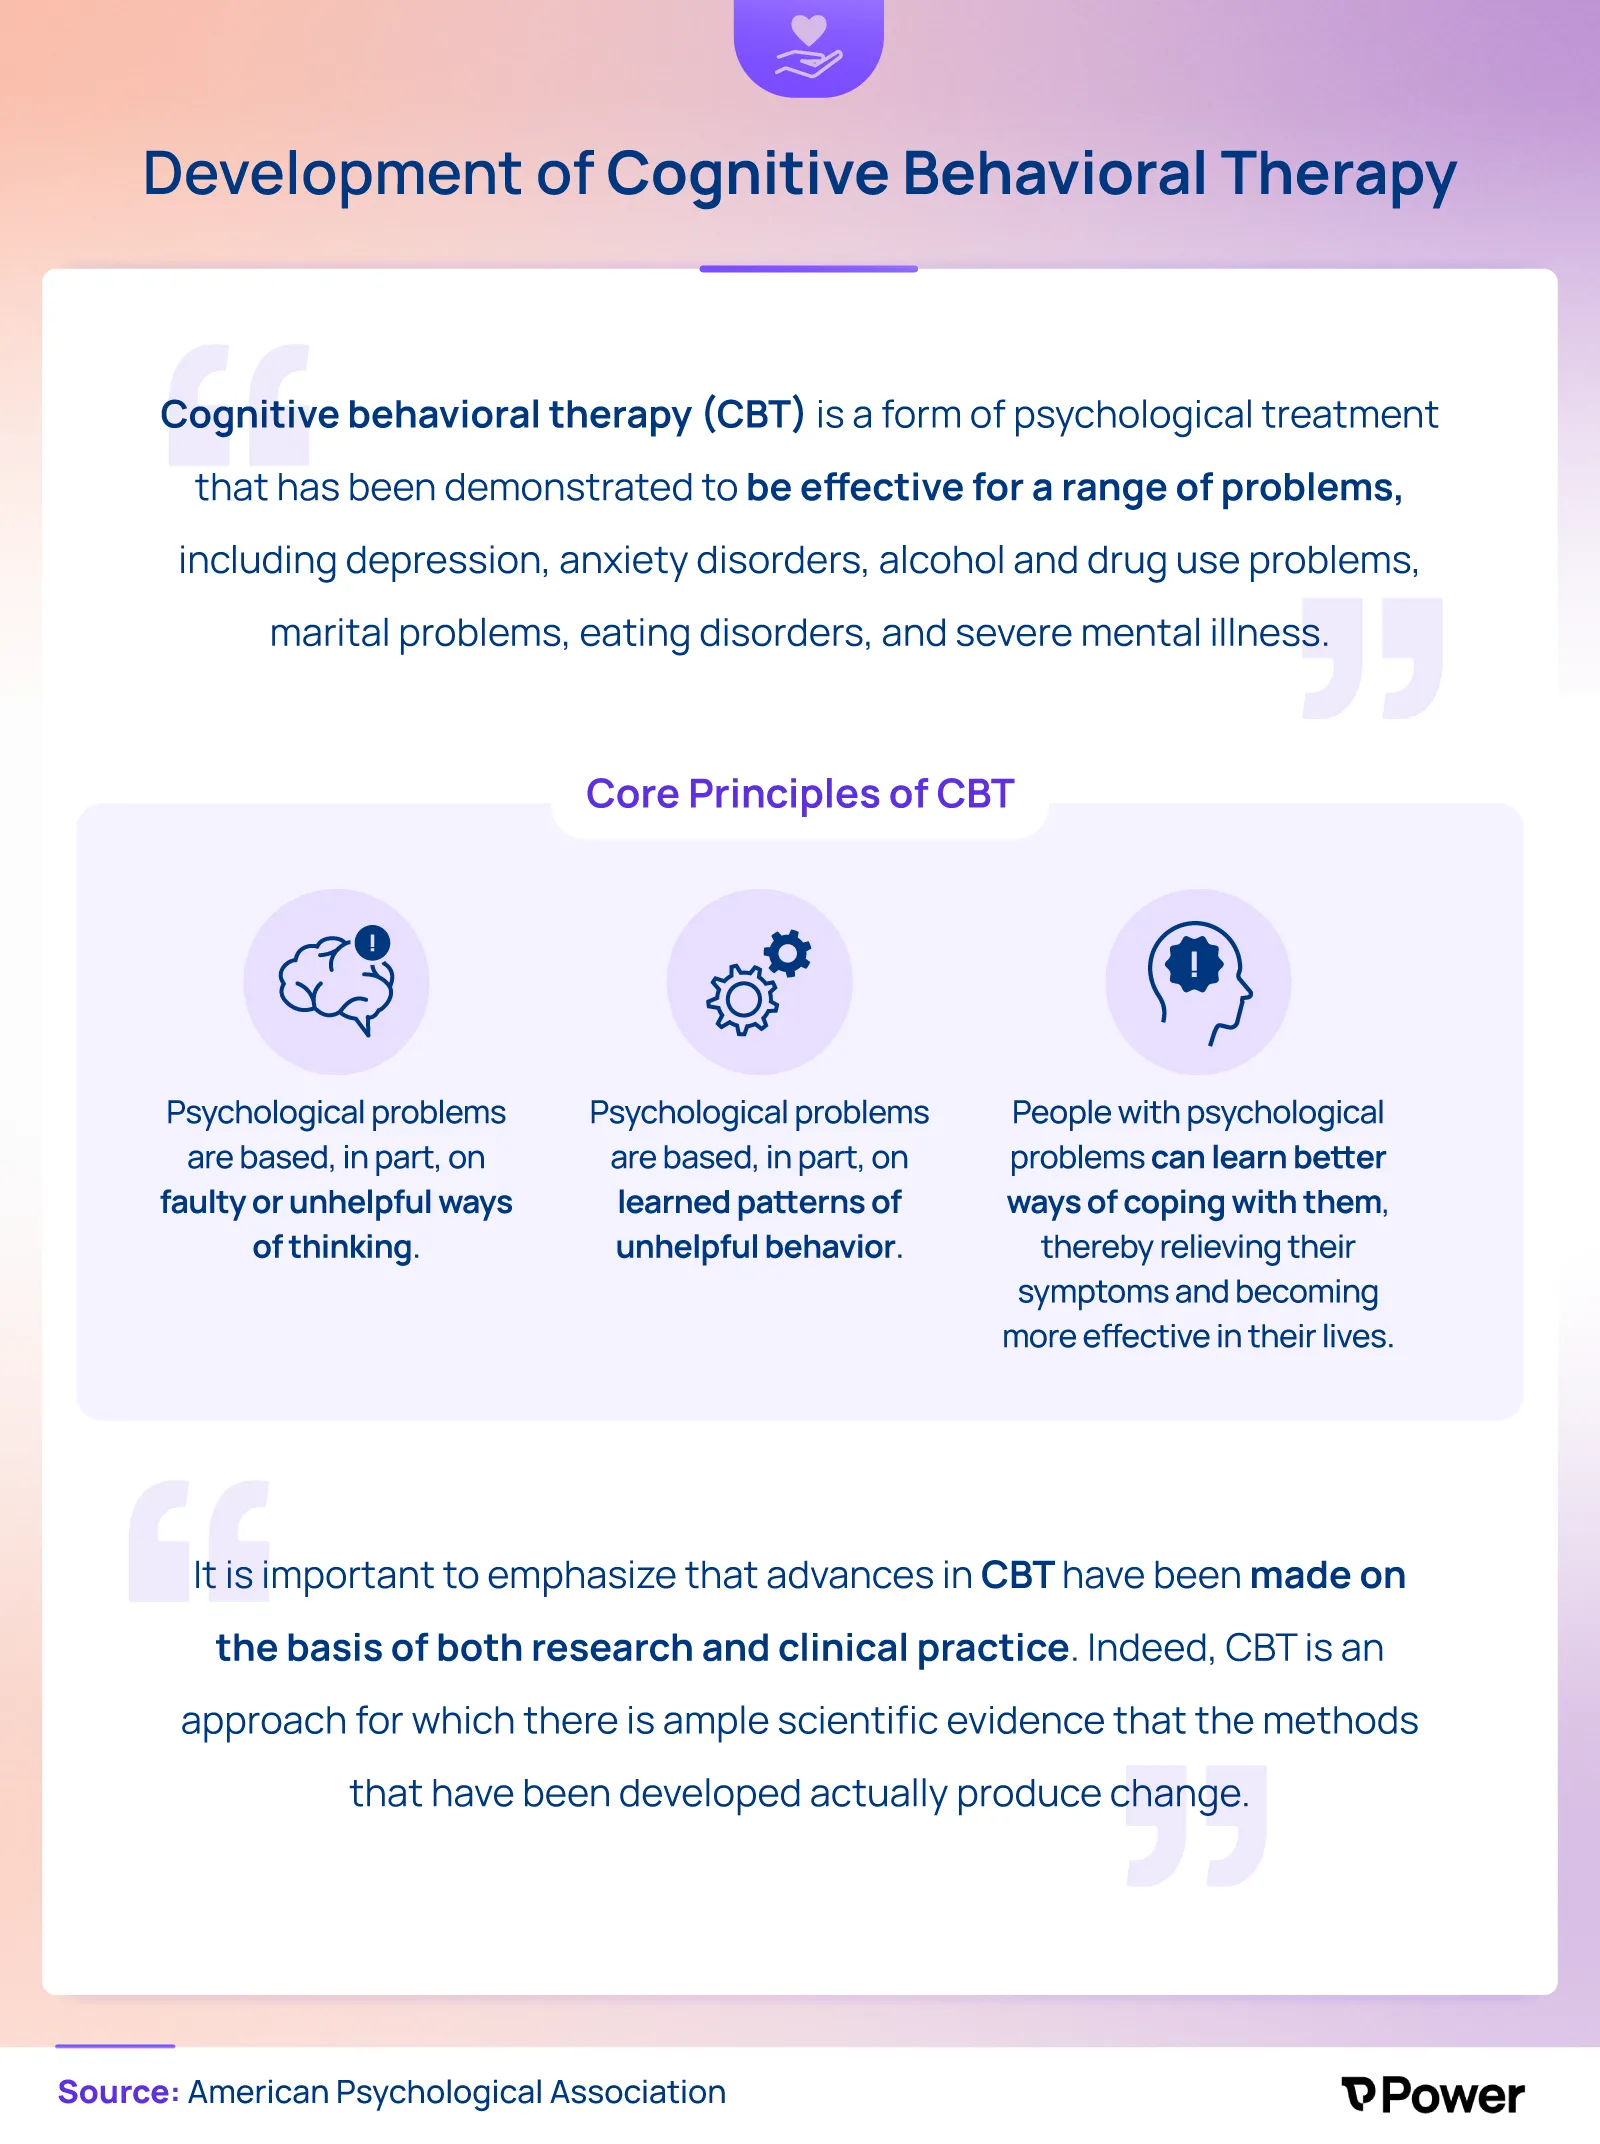 Development of Cognitive Behavioral Therapy